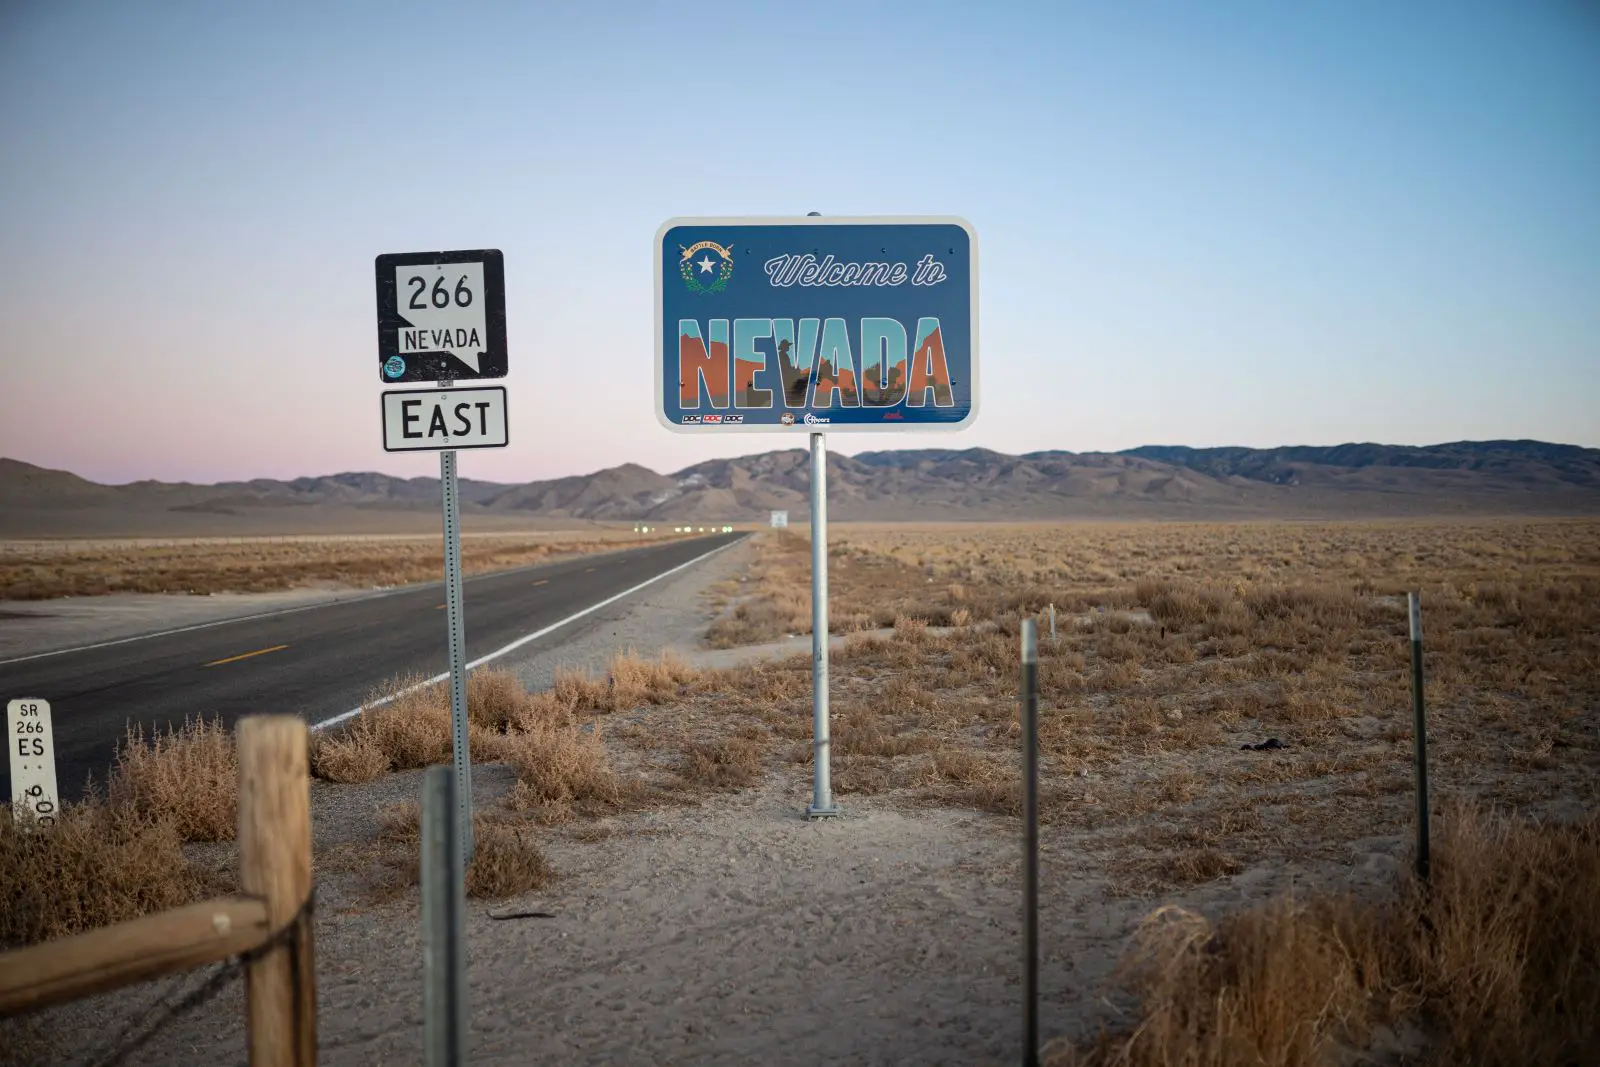 Top 5 Places to Retire in Nevada- Highway 266 East sign along the highway and a sign that says Welcome to Nevada on the right side, a barbed wire fence with metal poles on the lower part of the photo, desert on both sides and brown foothills in the distance